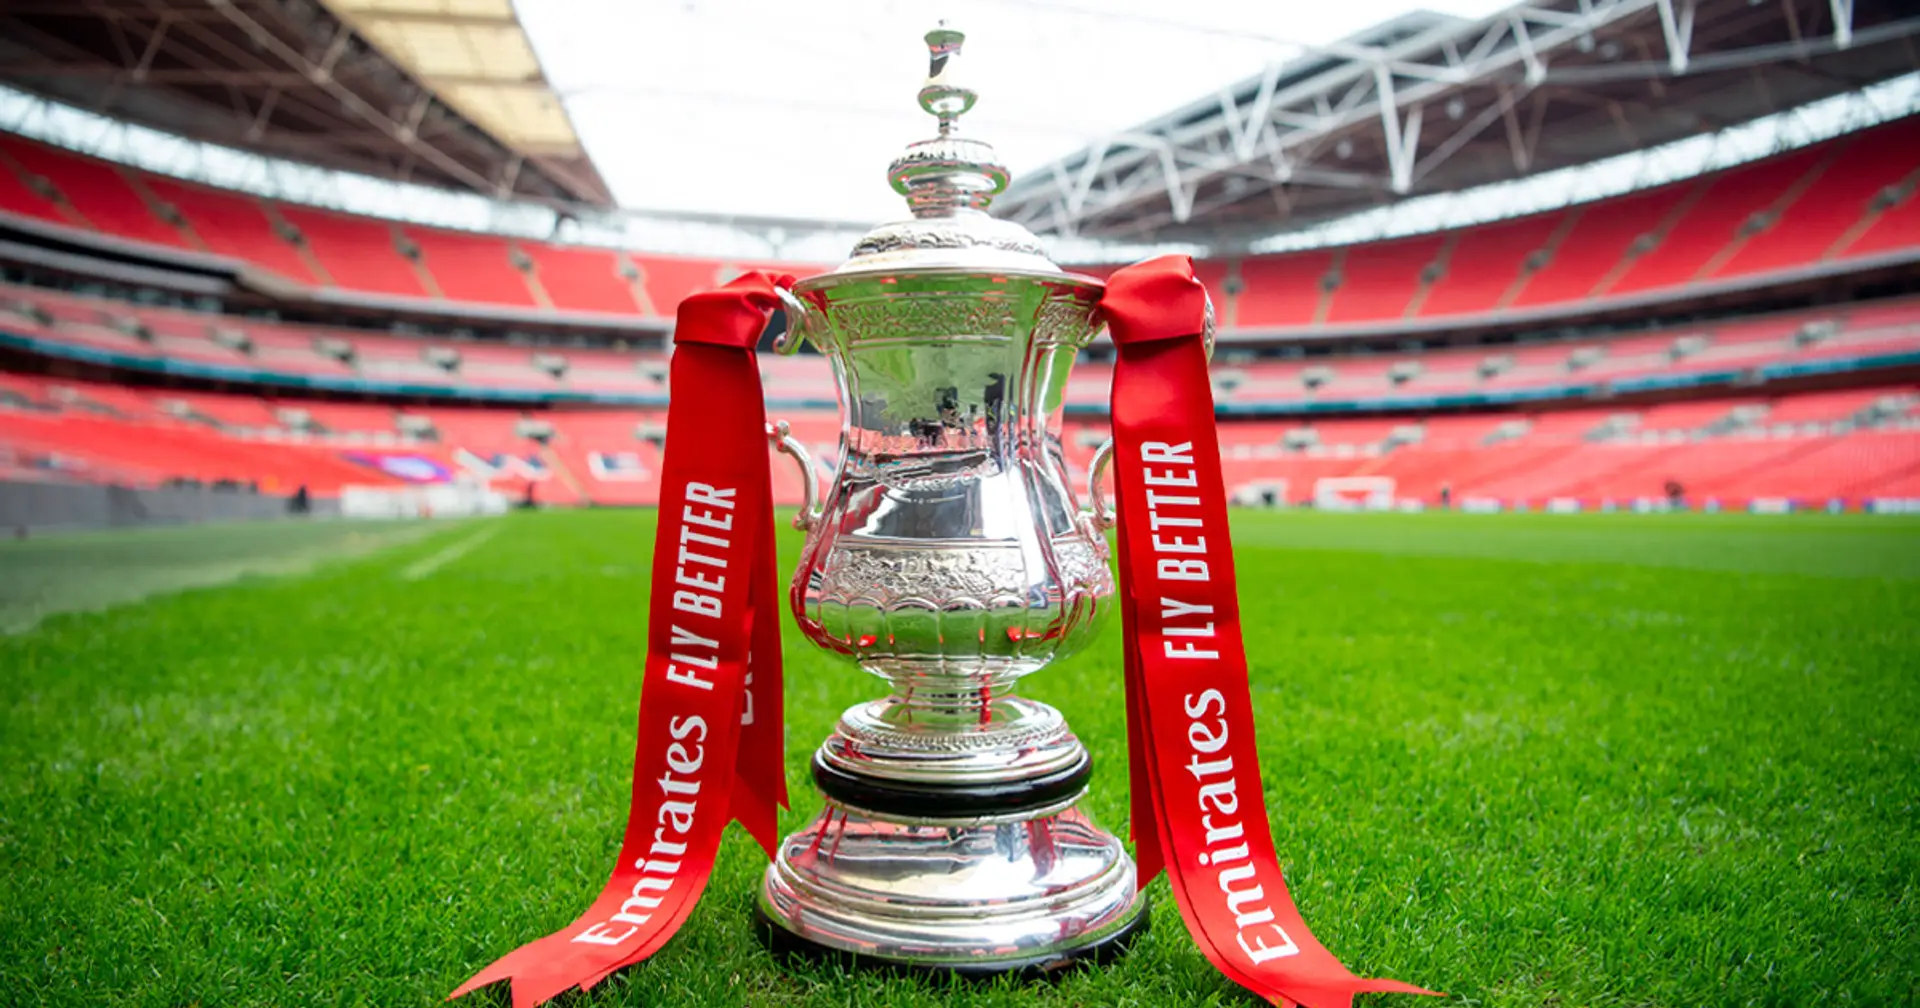 OFFICIAL: Chelsea face Luton Town in FA Cup 4th round